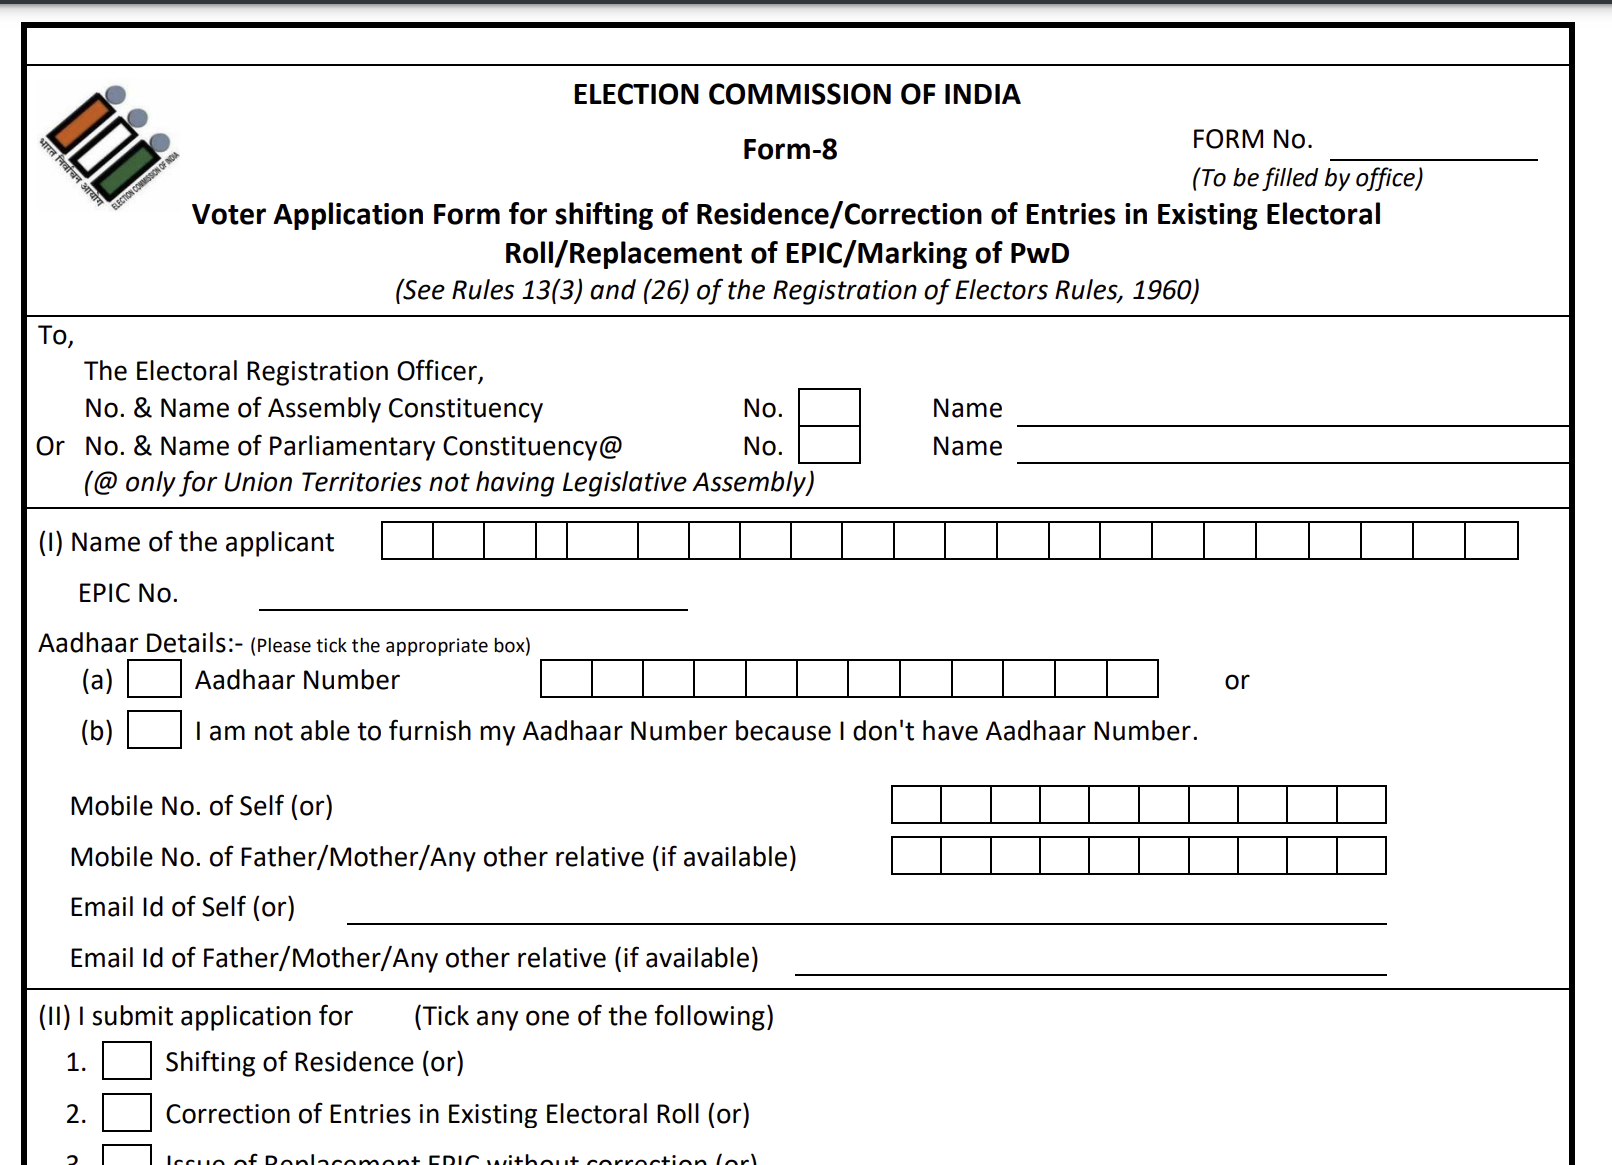 Voter ID Form 8